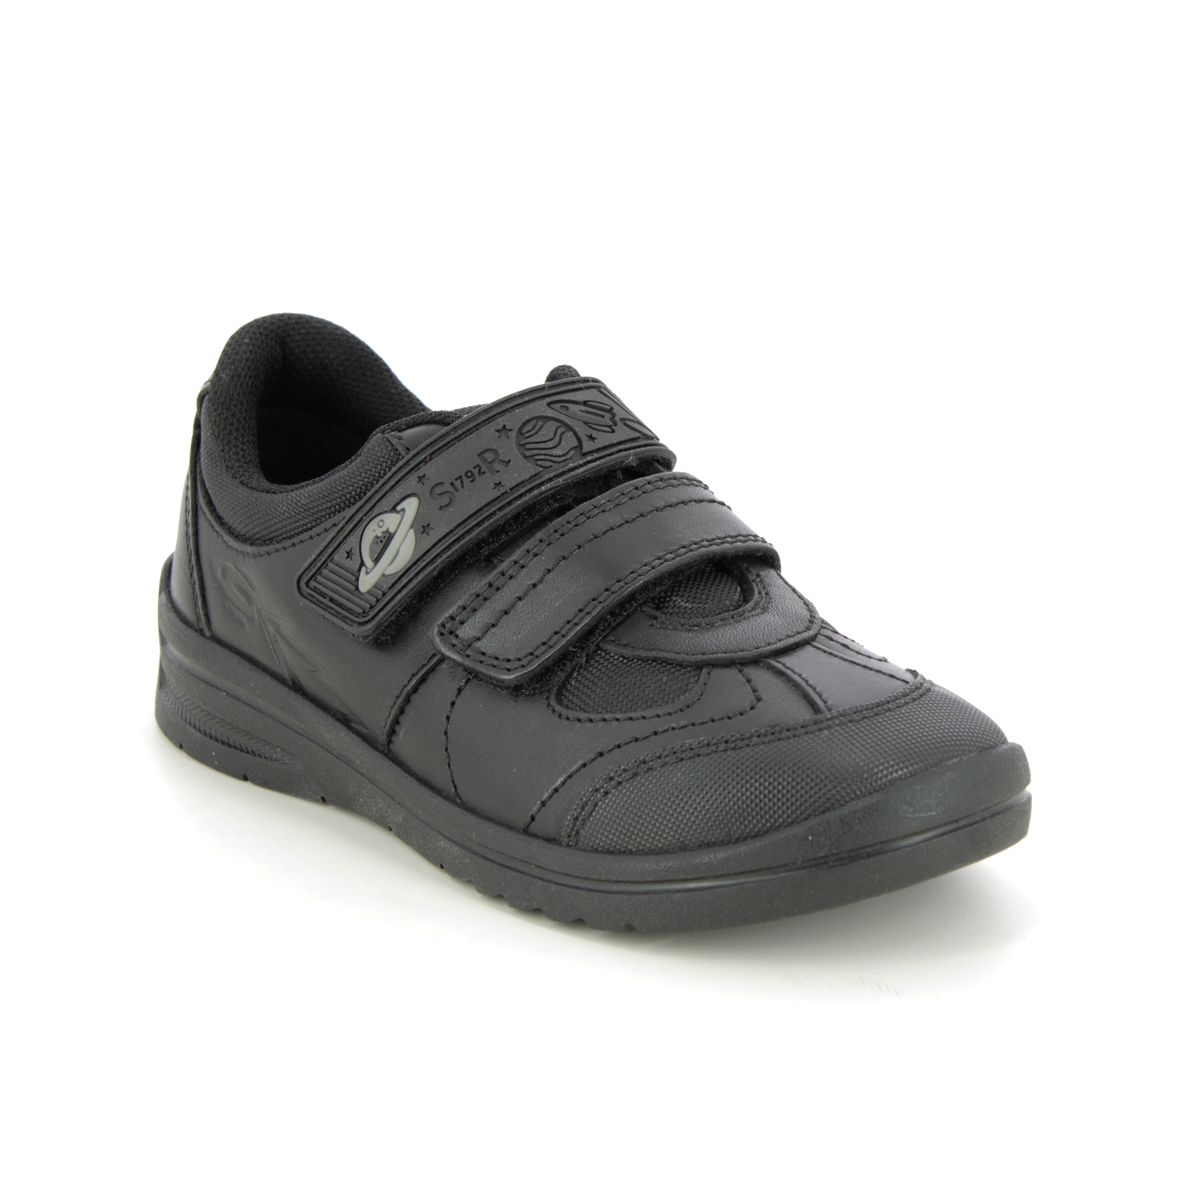 Start Rite - Rocket 2V In Black Leather 2797-75E In Size 2 In Plain Black Leather For School Boys Shoes  In Black Leather For kids